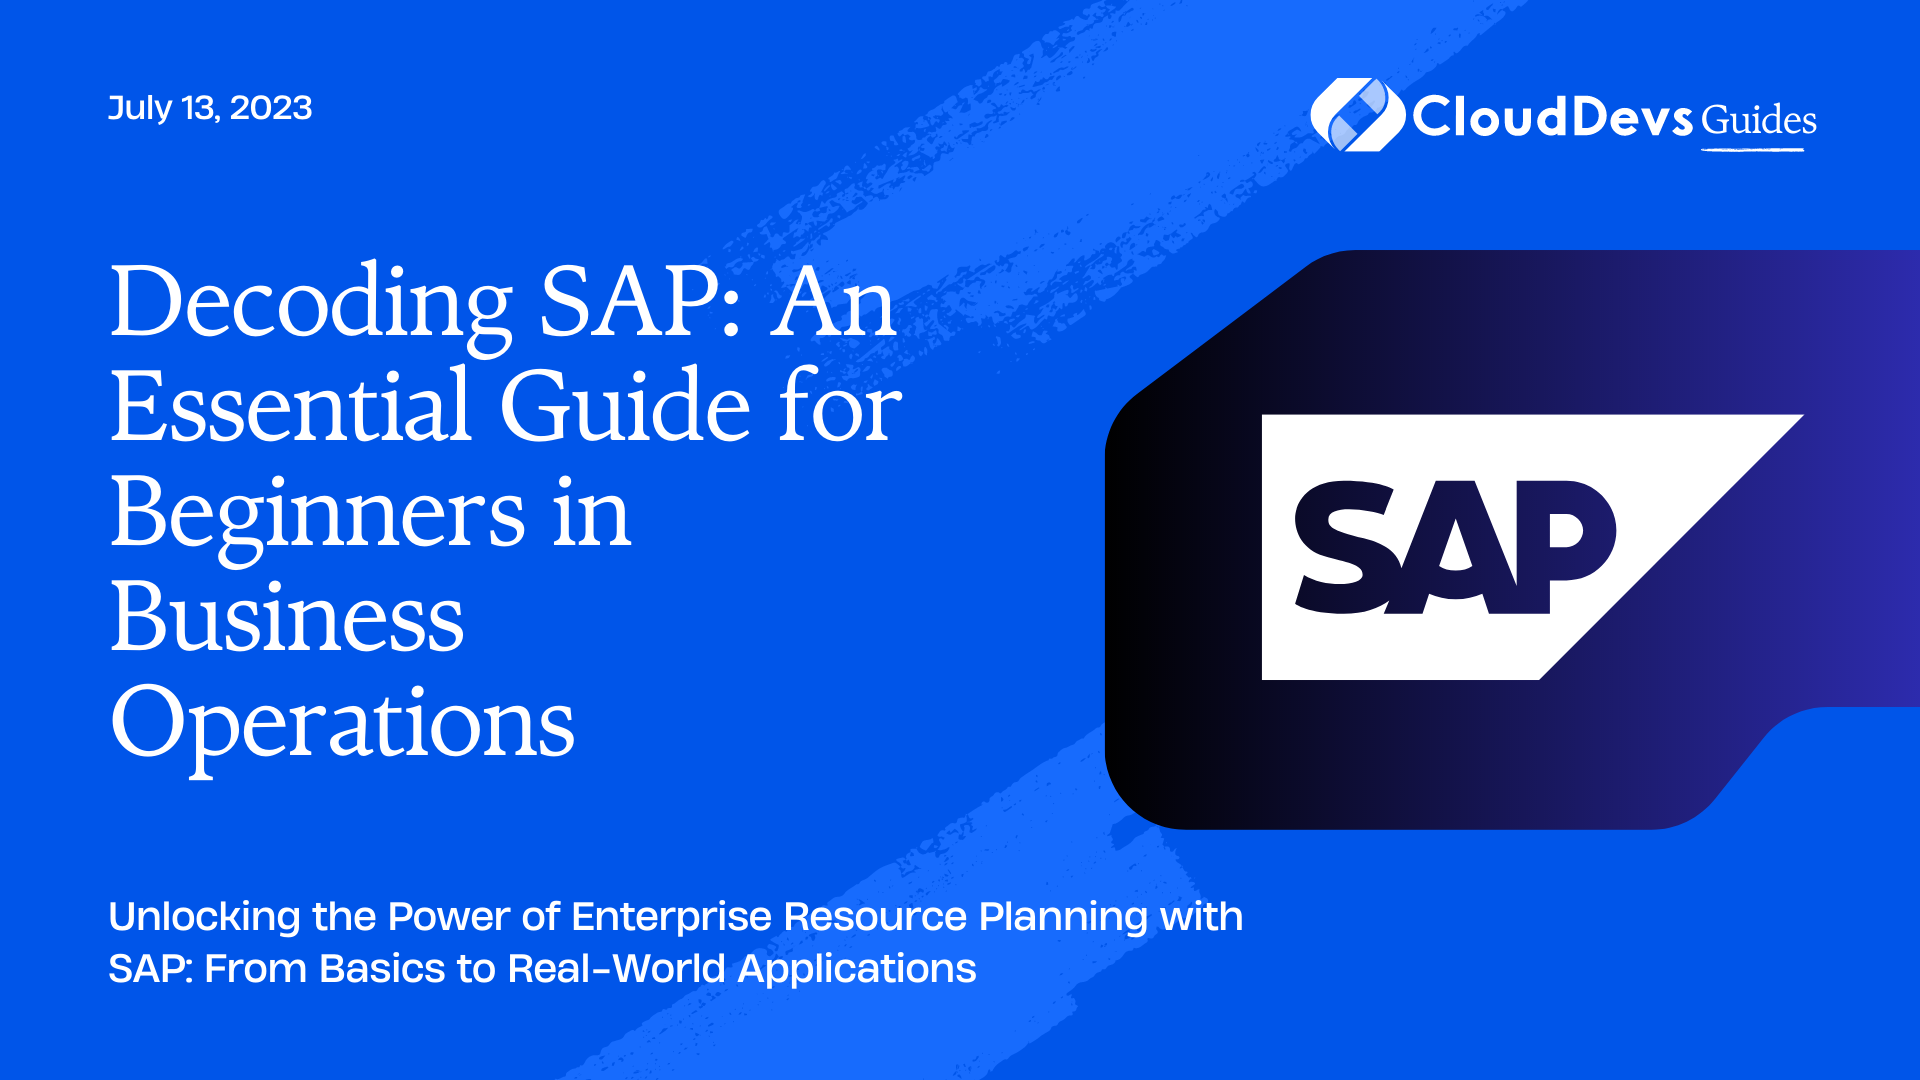 Decoding SAP: An Essential Guide for Beginners in Business Operations